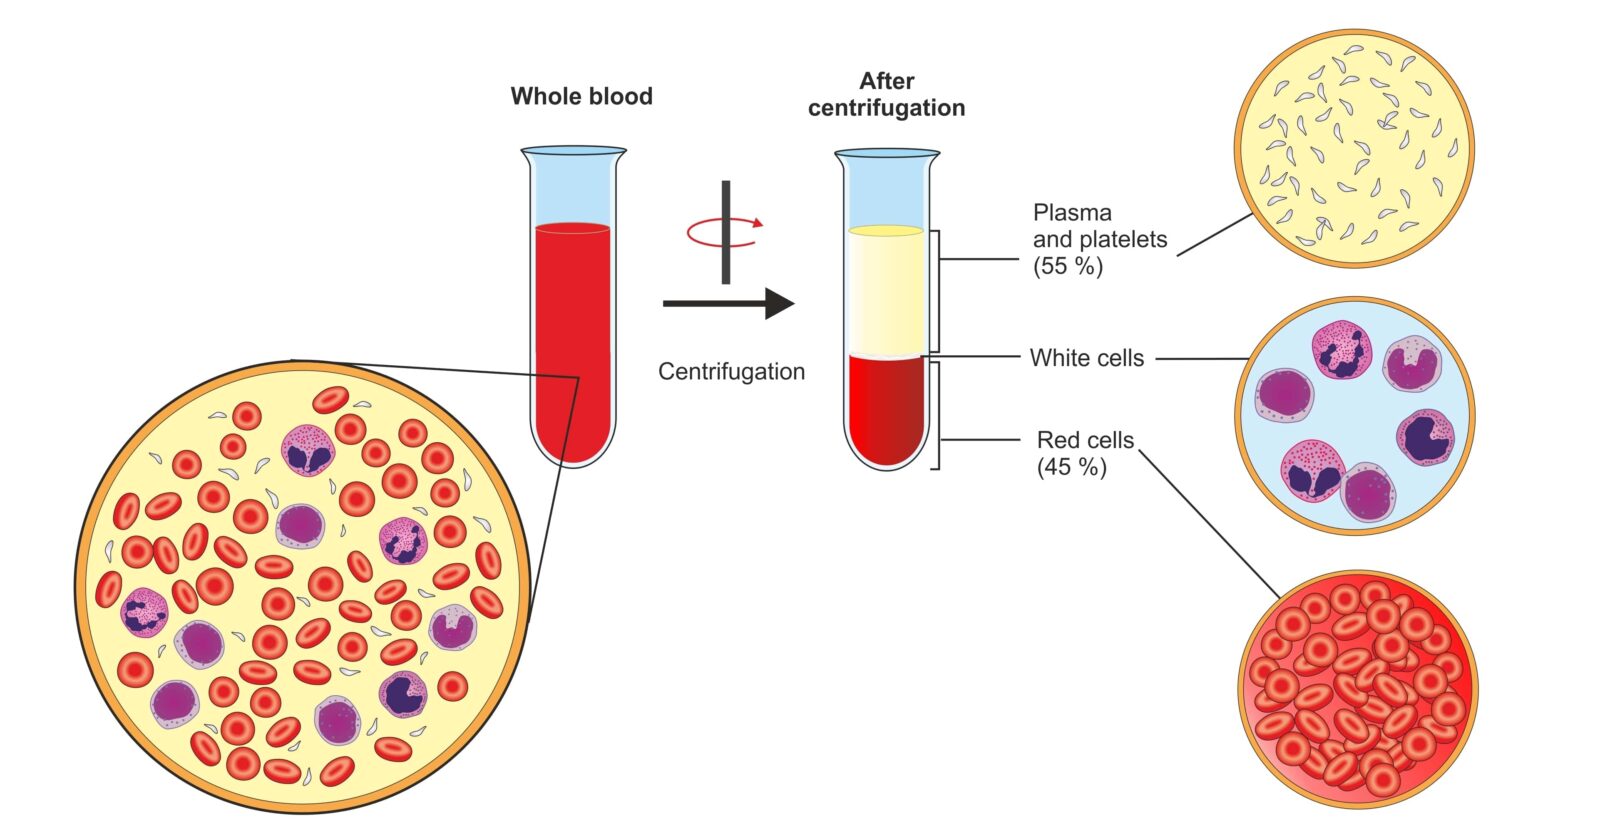 platelet-rich plasma before and after centrifugation